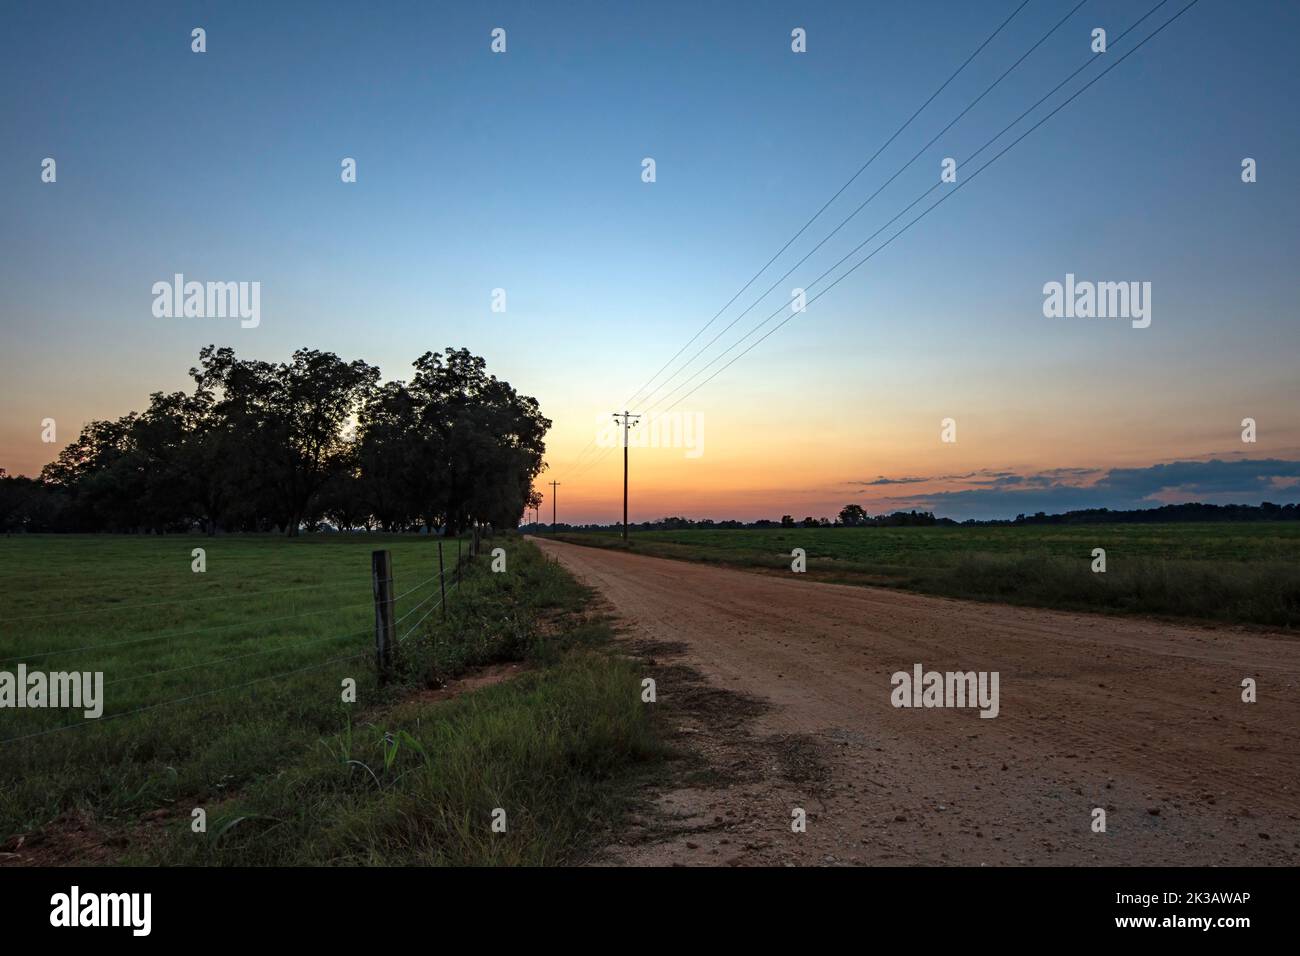 Background of a red dirt road leading into the sunset with a fenced pasture on the left and a peanut field on the right. Stock Photo